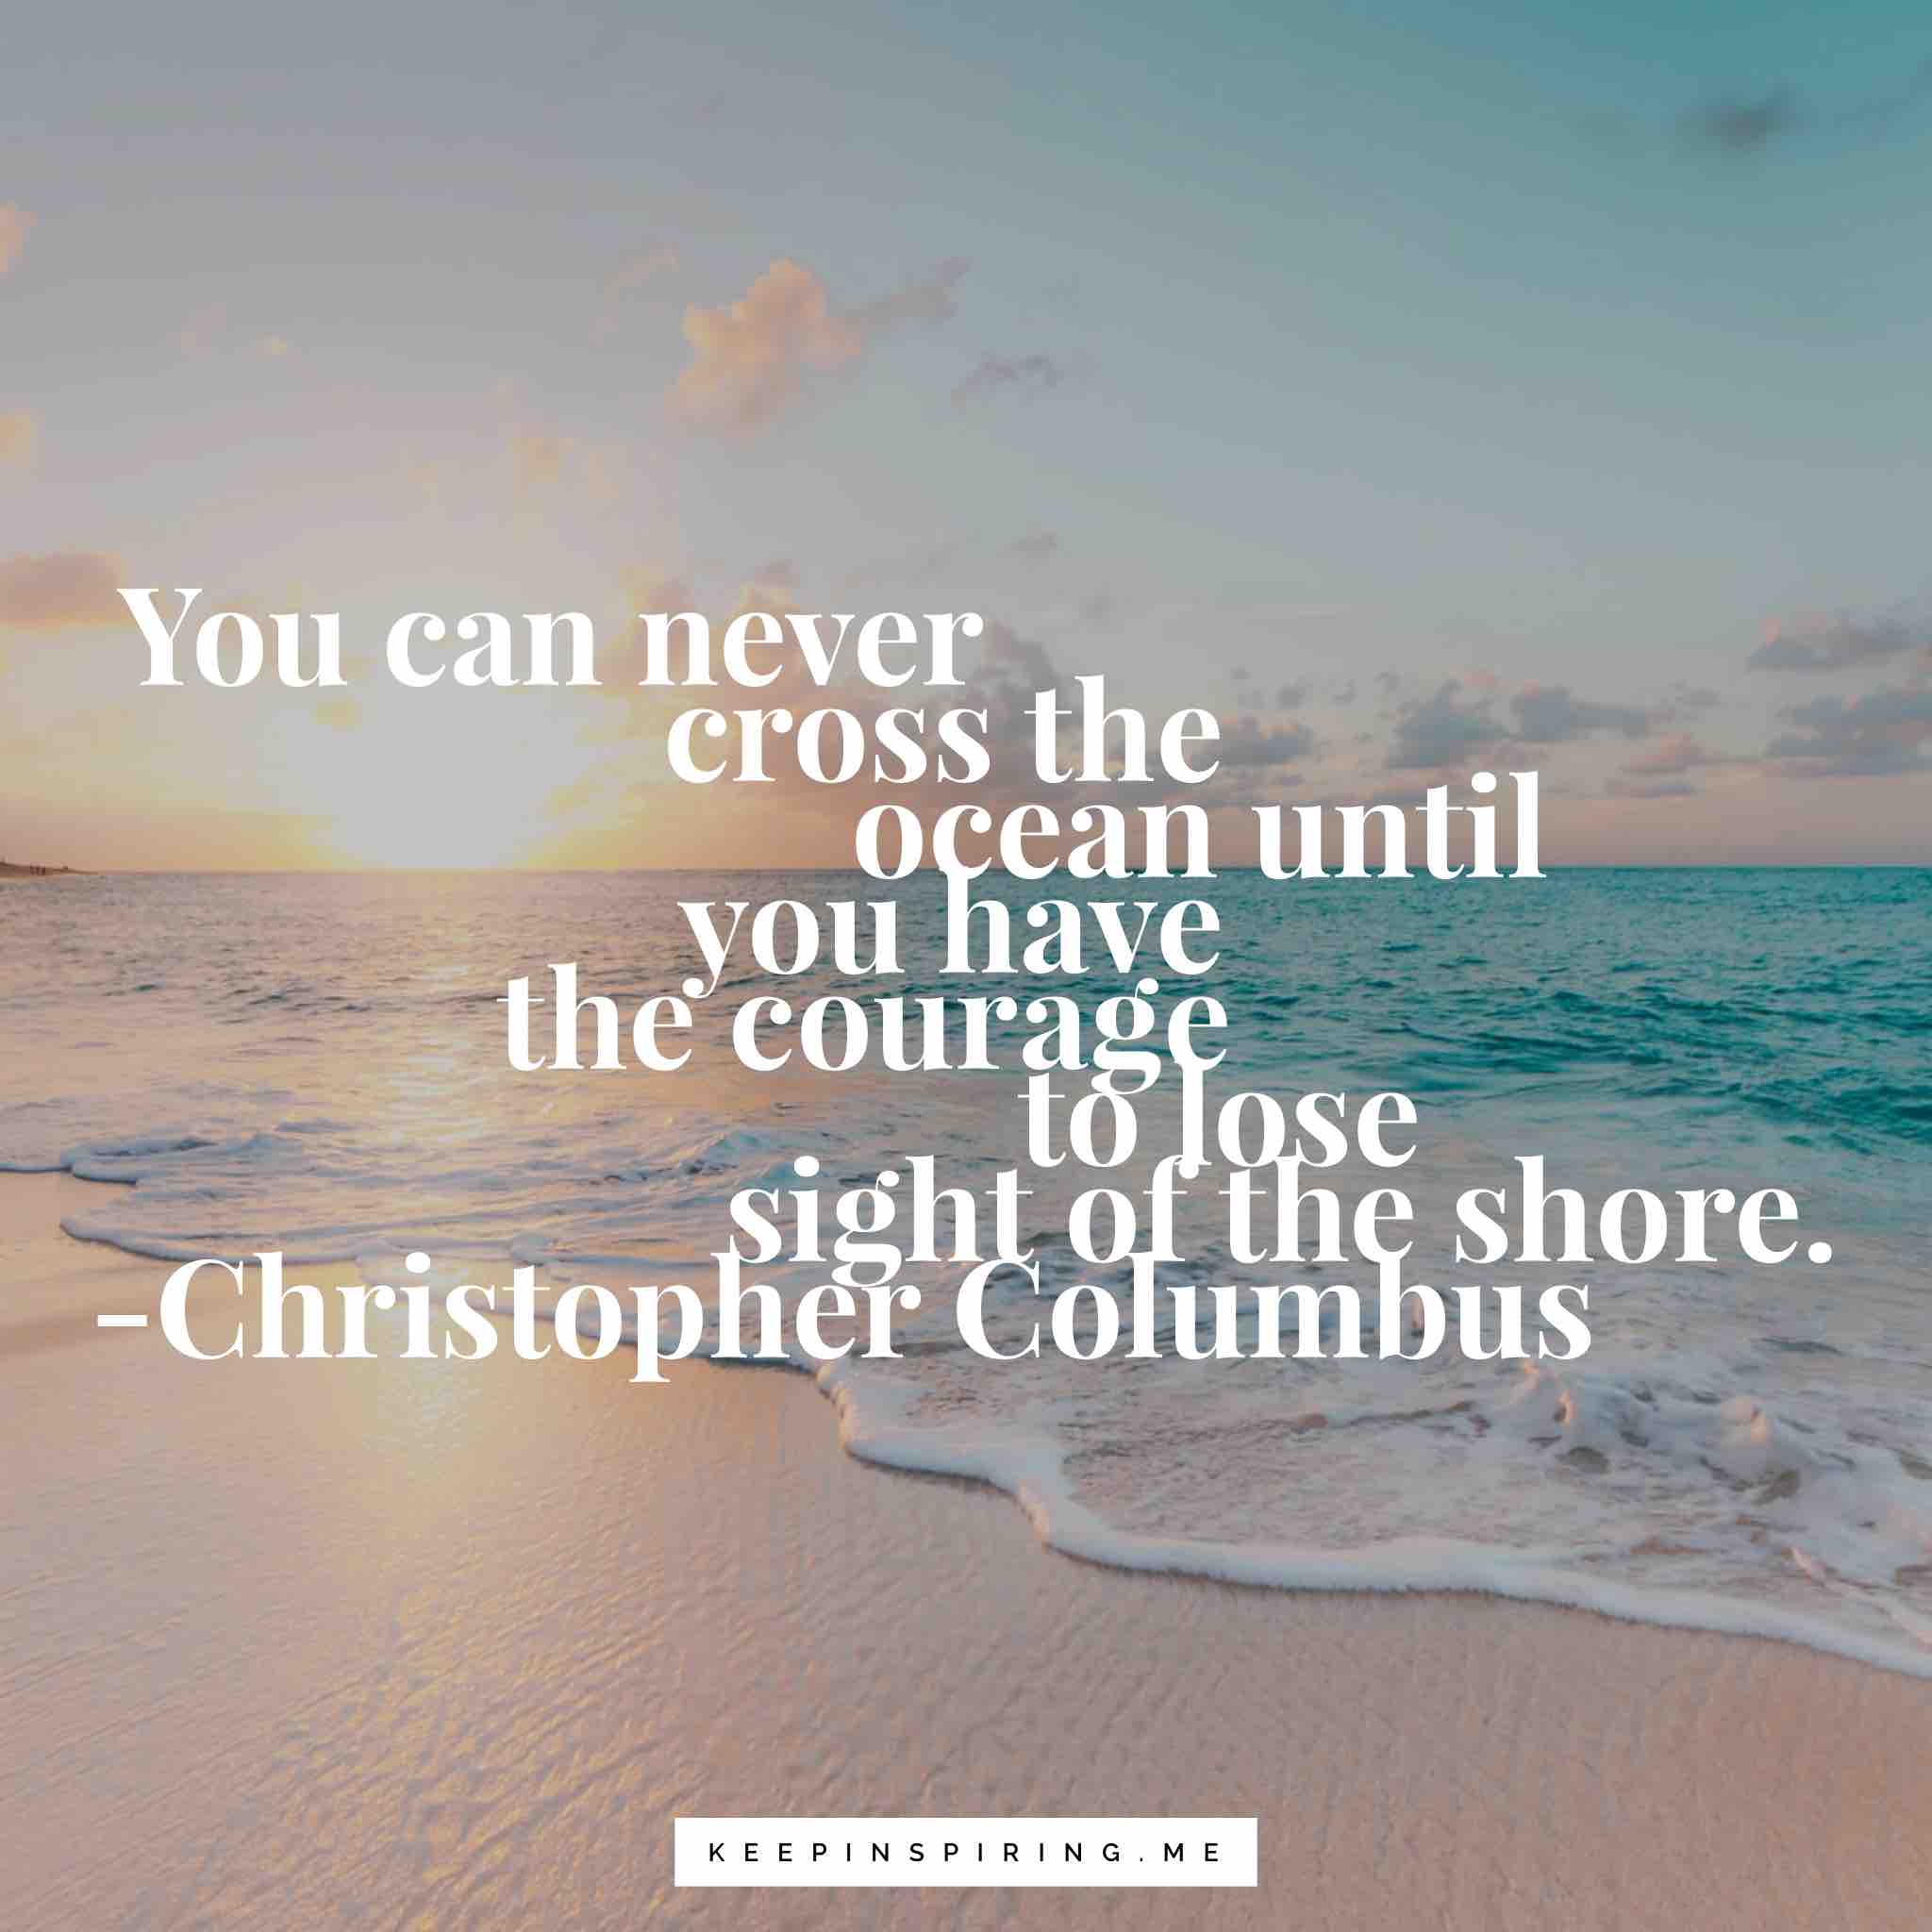 you can never cross the ocean until you have the courage to lose sight of the shore. christopher columbus